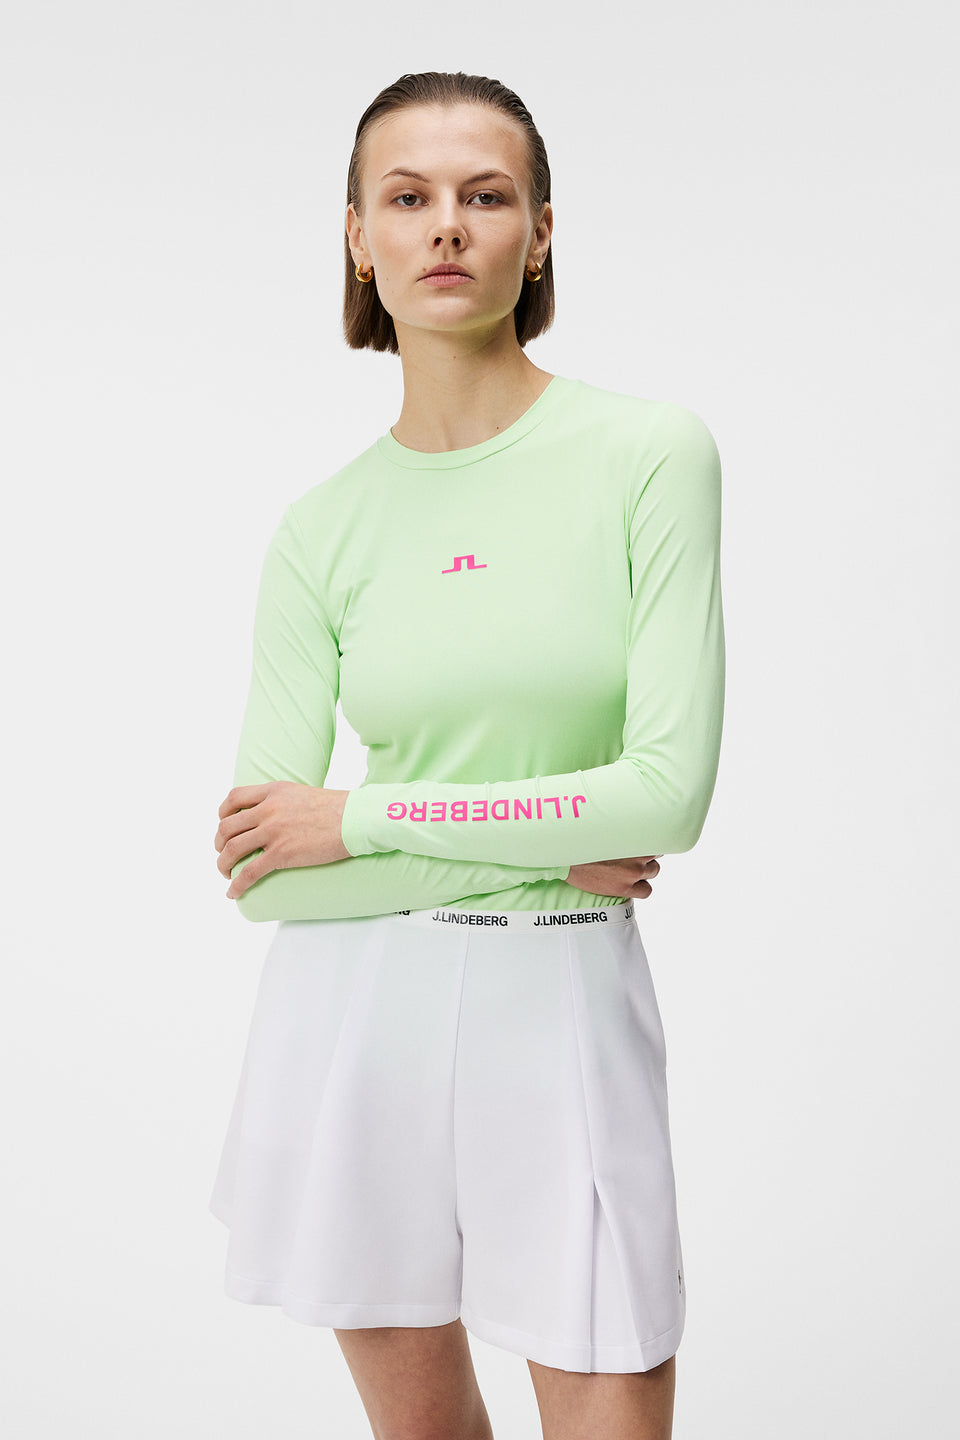 Modern Golf Clothing for Women - J.Lindeberg – Page 9